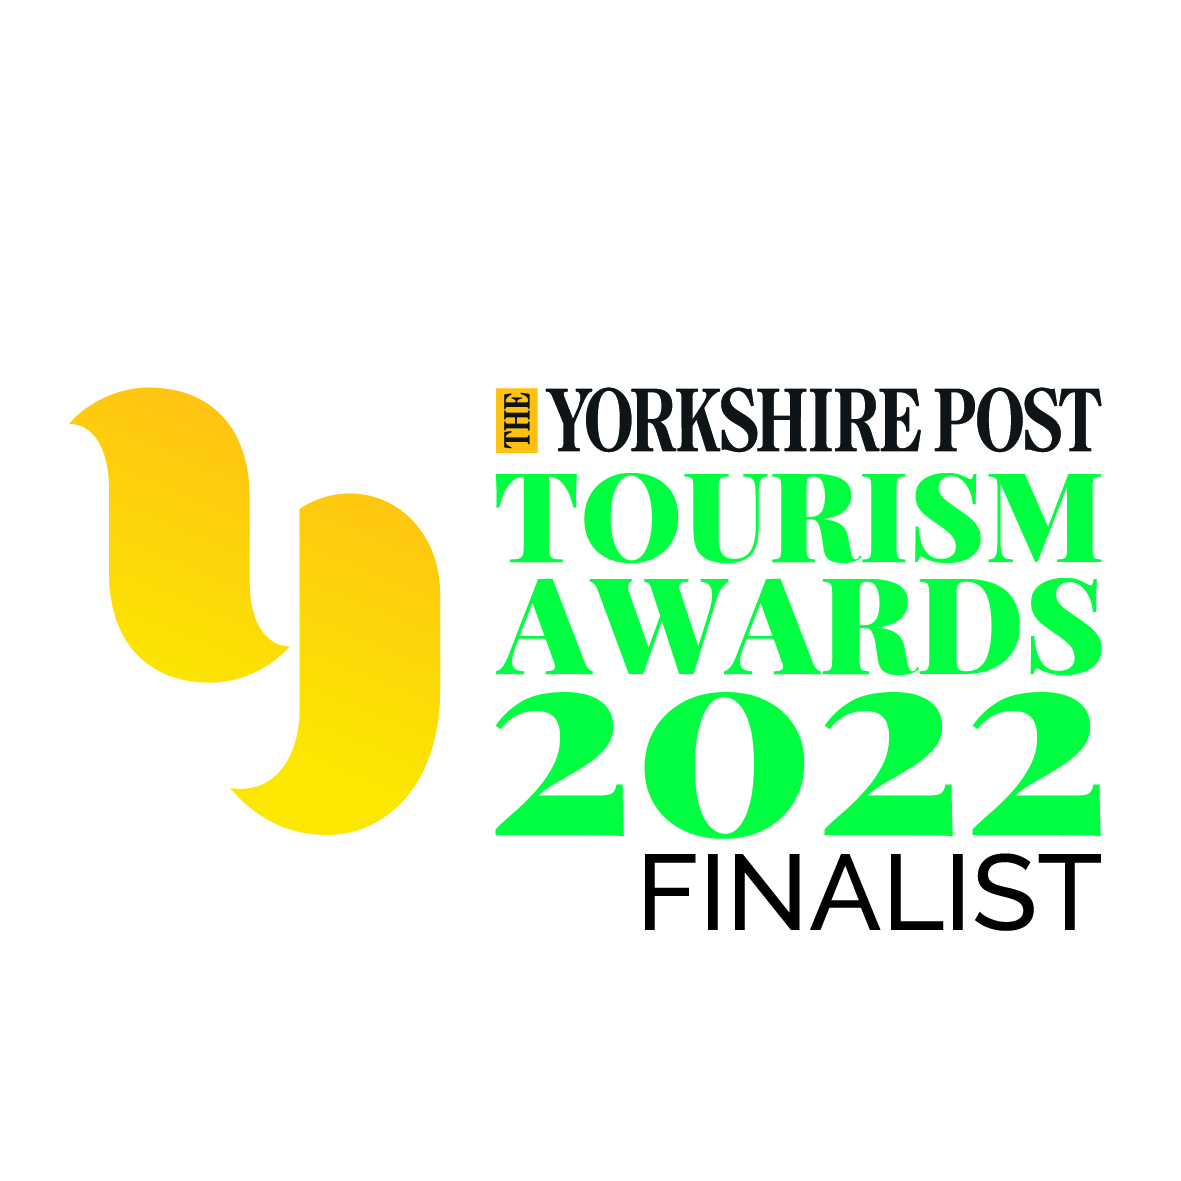 The Yorkshire Post Tourism Awards 2022 Finalist